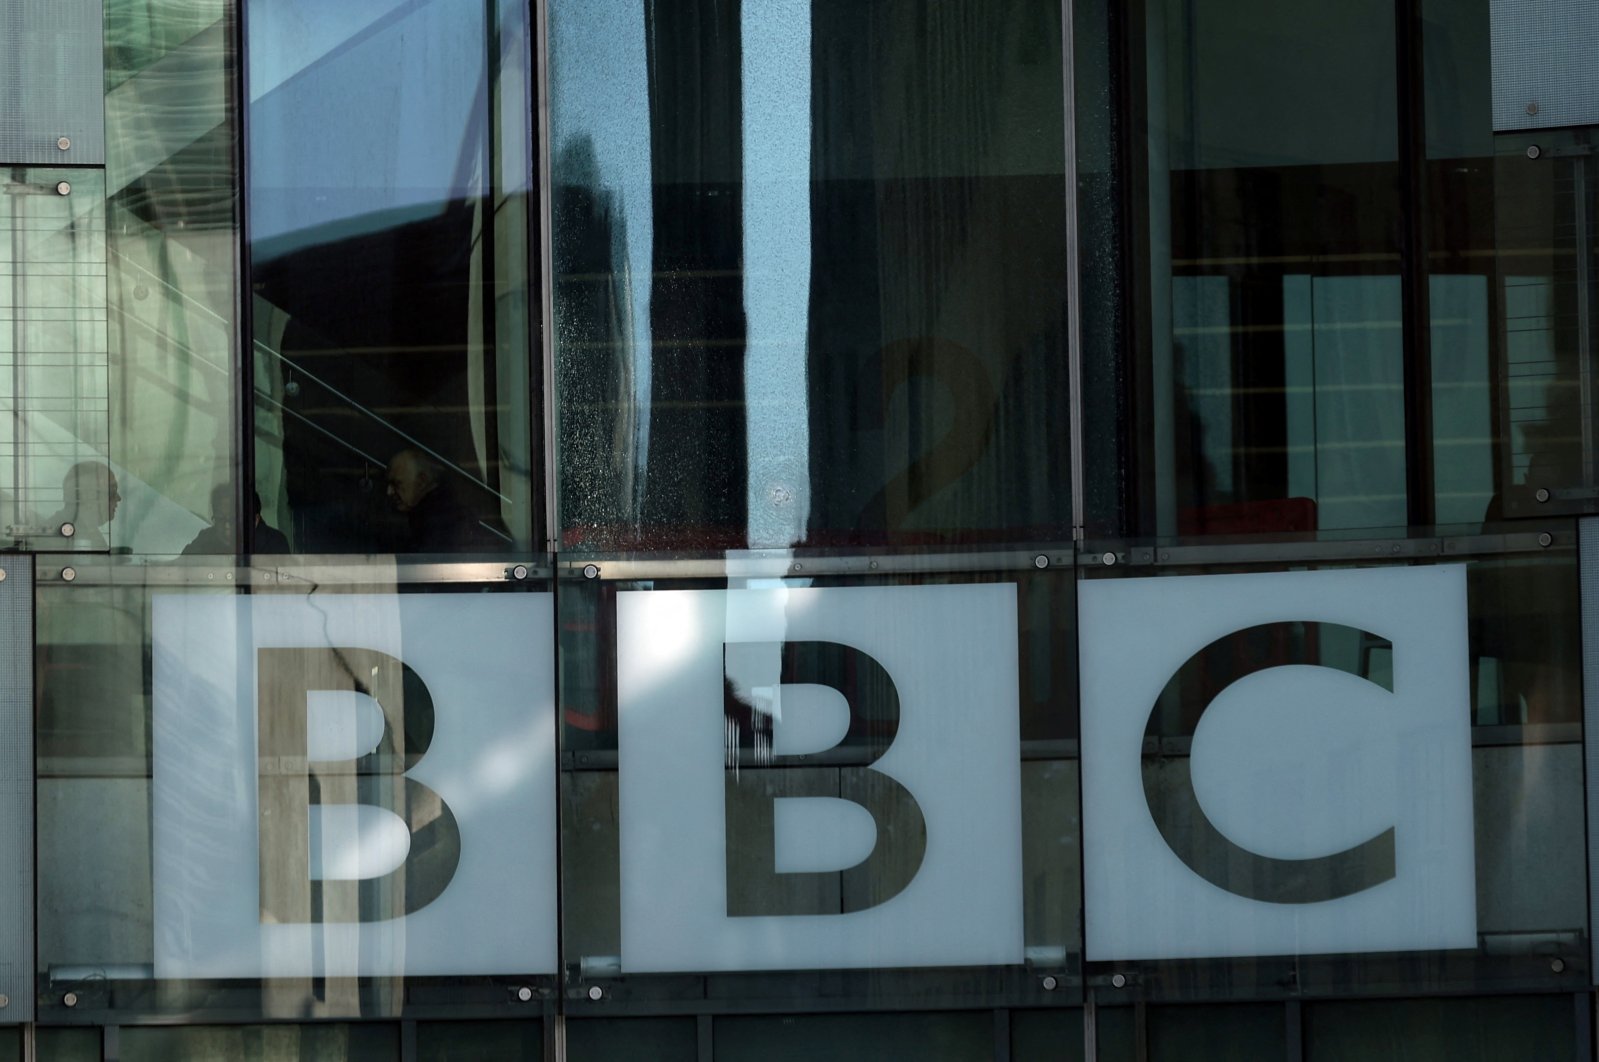 The BBC logo is seen at the BBC Broadcasting House offices and recording studios in London, Britain, Jan. 17, 2022. (Reuters Photo)